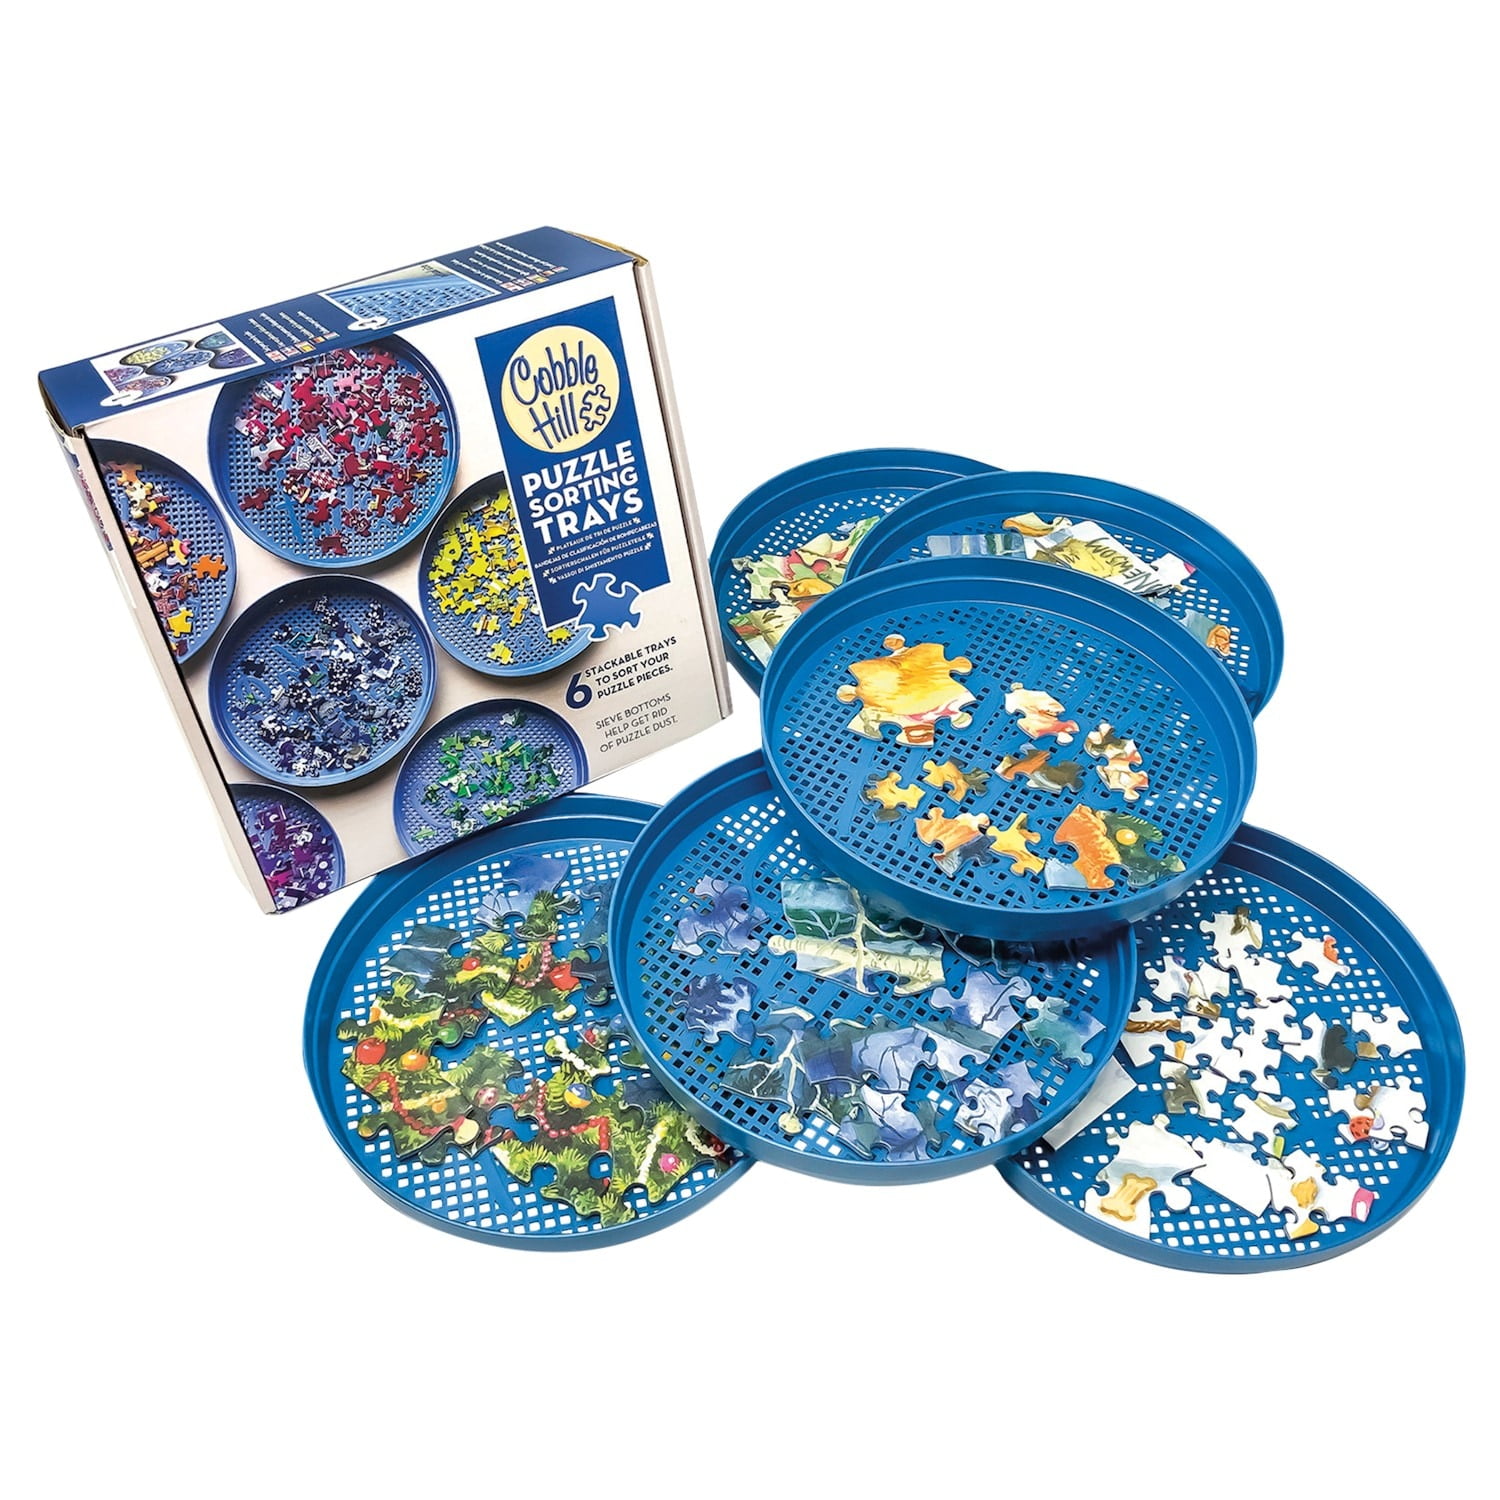 Puzzle Sorting Trays - Entertainment Earth